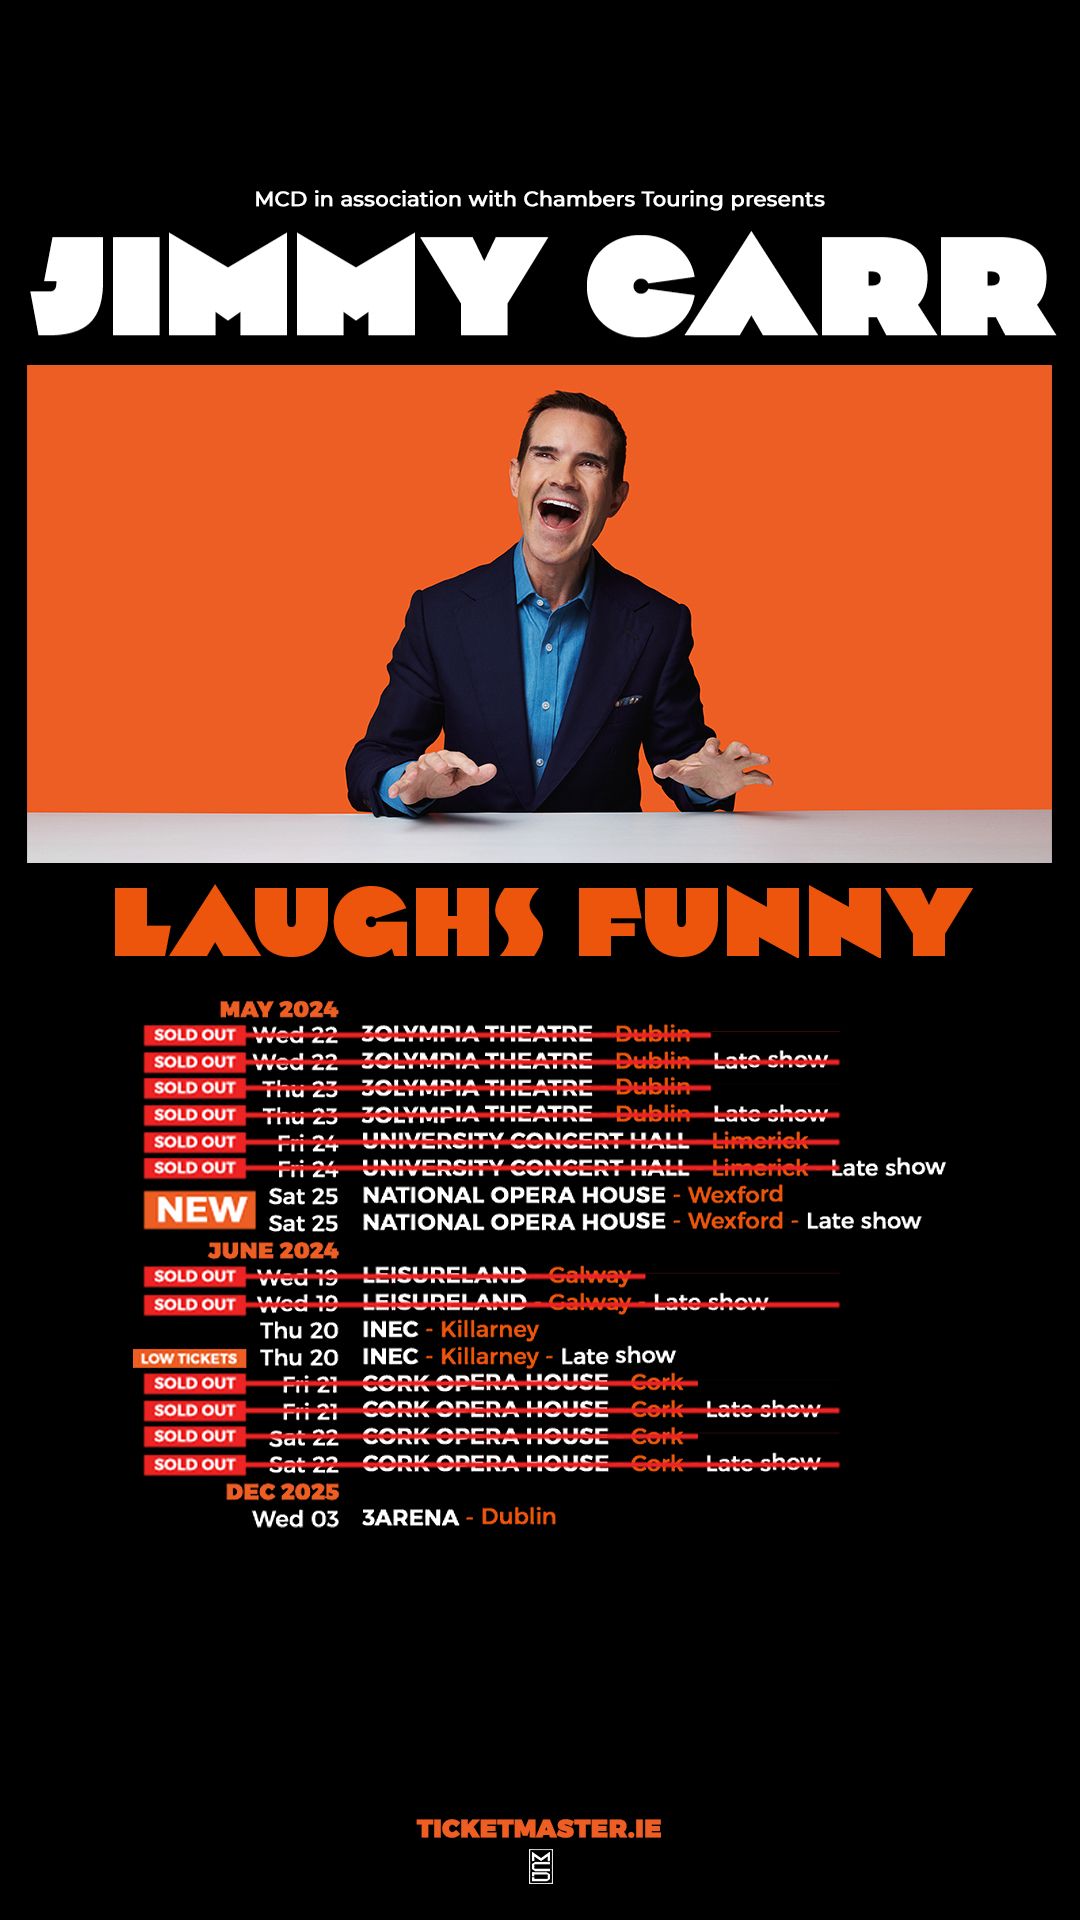 JIMMY CARR: LAUGHS FUNNY
NEW LIVE TOUR FOR 2024-2025
Extra Shows In Wexford Confirmed
Tickets On Sale This Friday
